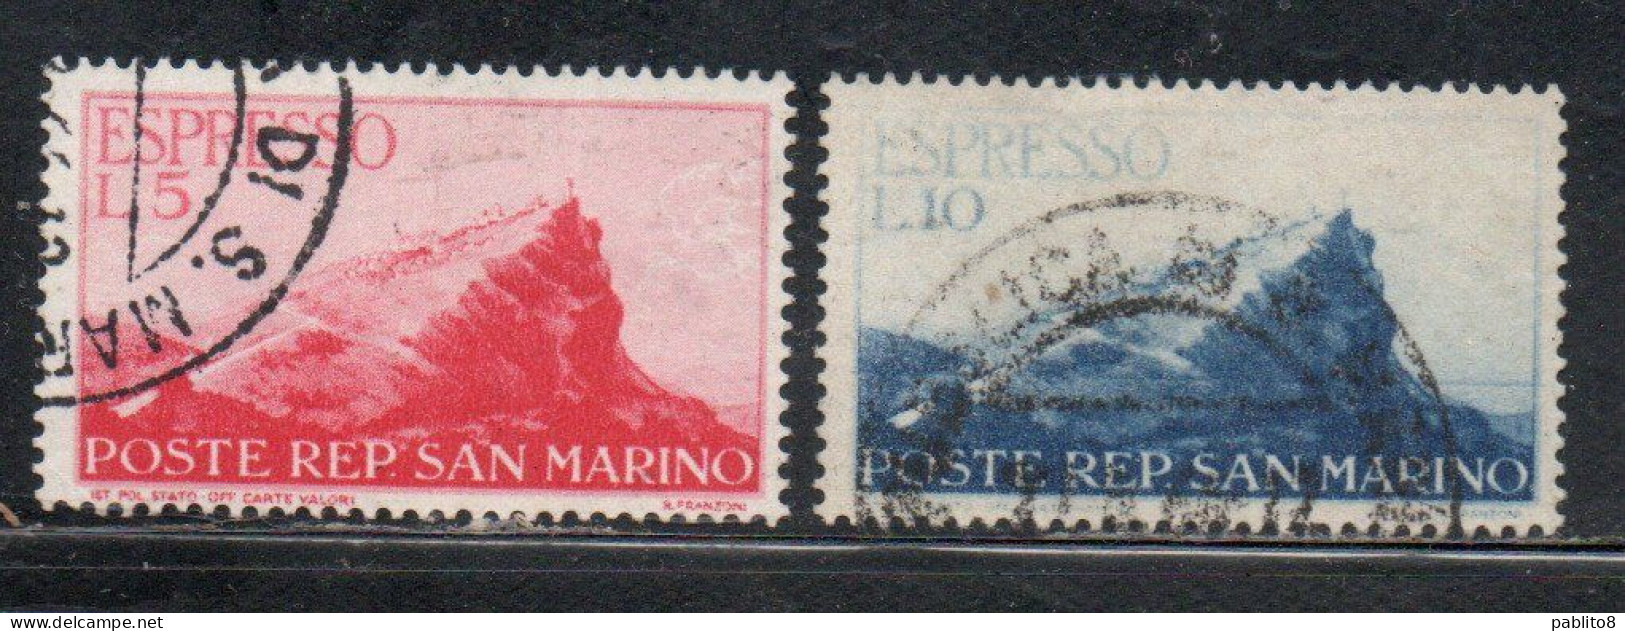 SAN MARINO 1945 1946 ESPRESSI VEDUTA SPECIAL DELIVERY VIEW SERIE COMPLETA COMPLETE SET USATA USED OBLITERE' - Express Letter Stamps